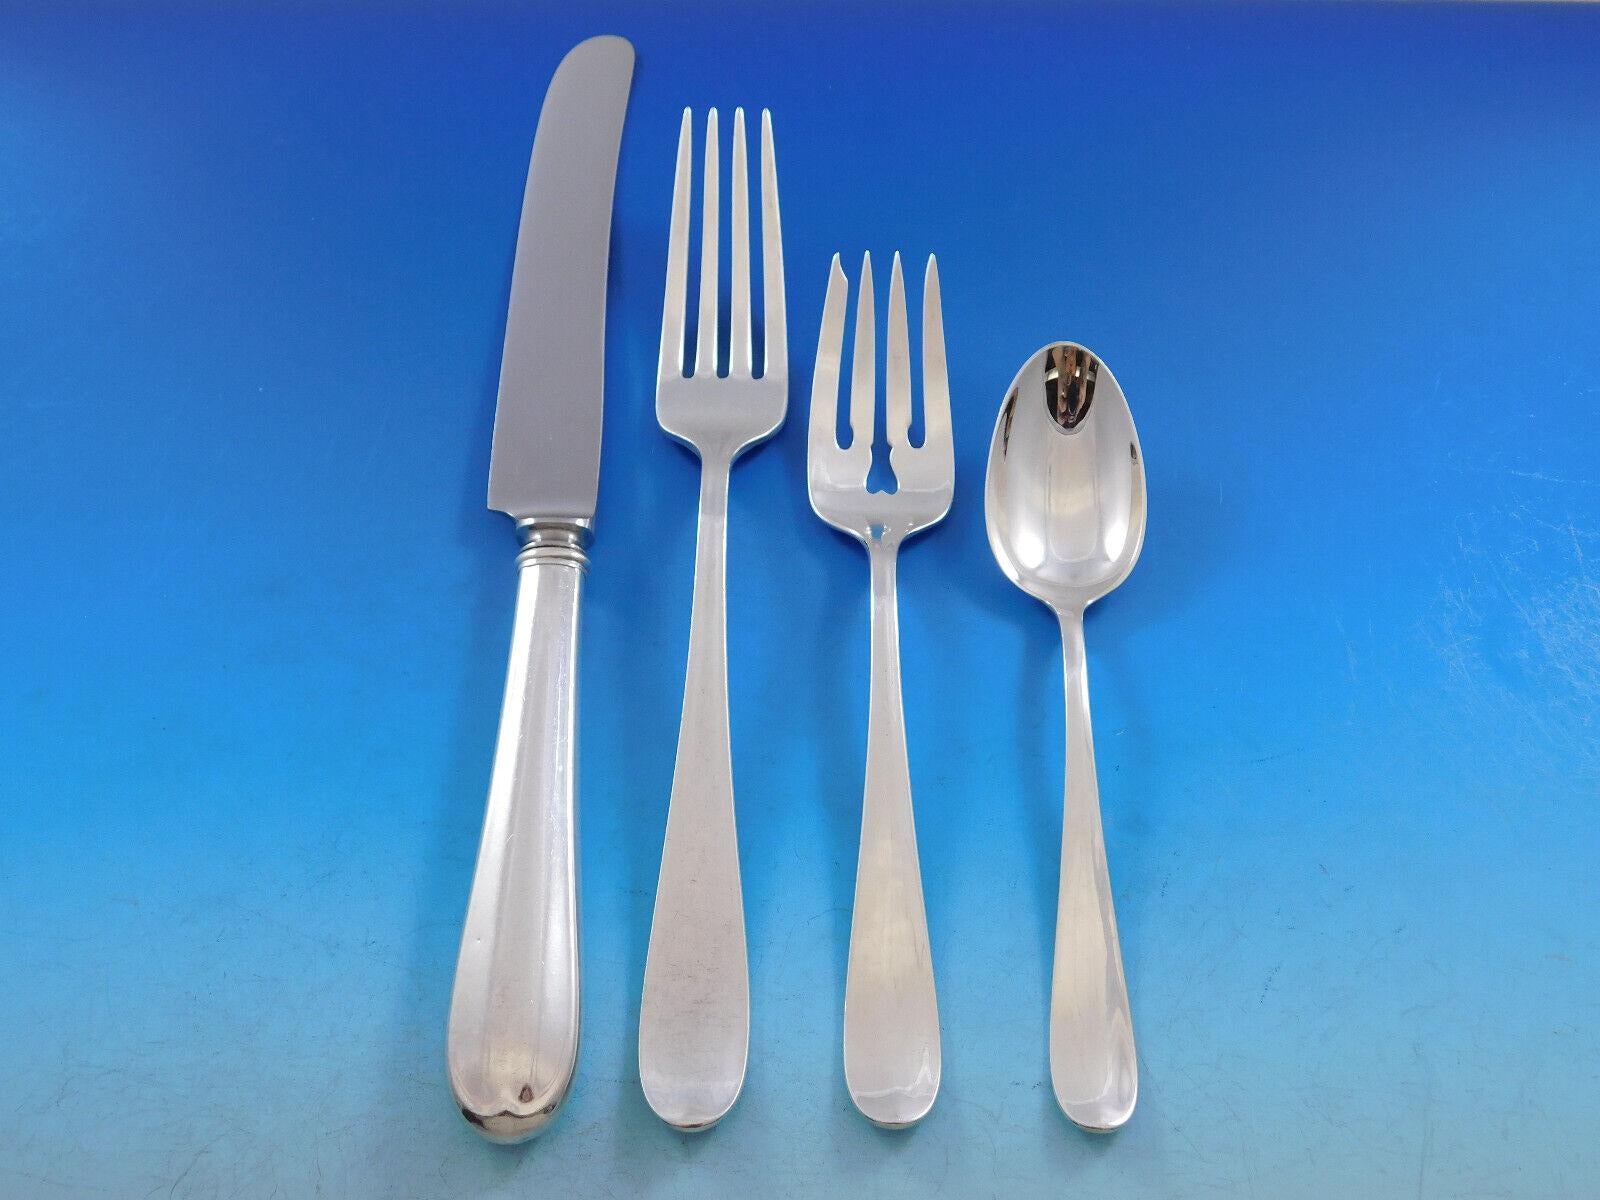 Dinner Size Dolly Madison by Gorham circa 1929 Sterling Silver Flatware set - 58 pieces. This scarce pattern is timeless and unadornd, showing off the silver in its best form. This set includes:

8 Dinner Size Knives, 9 5/8